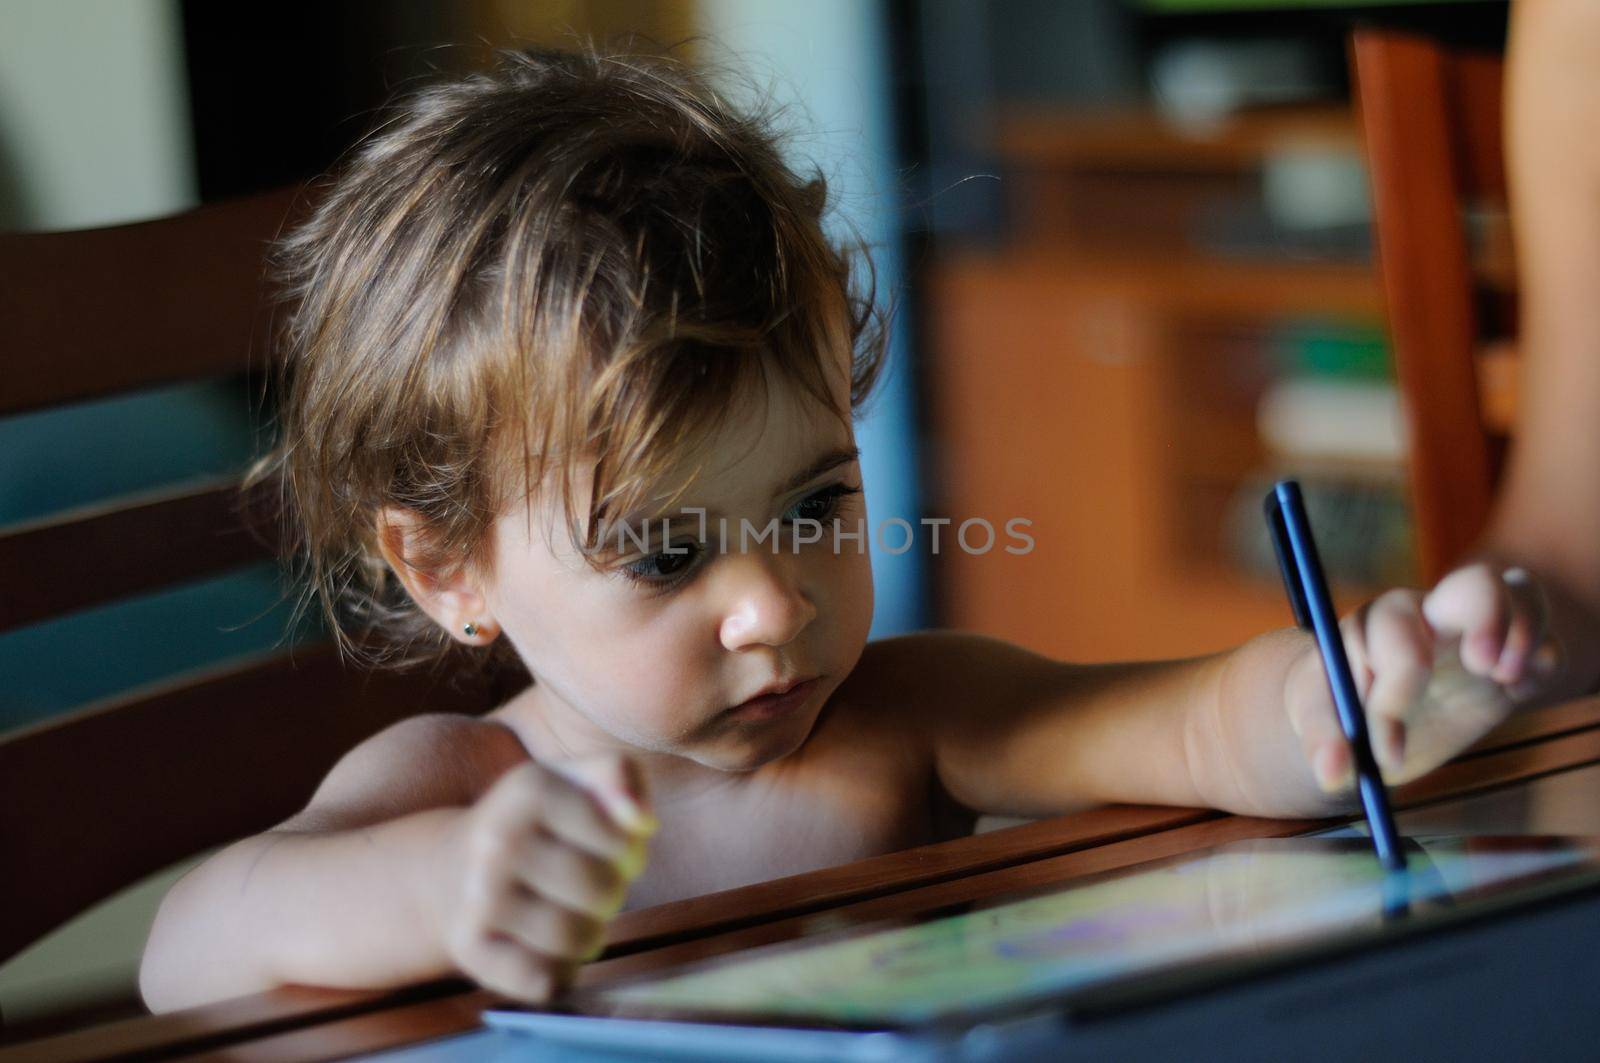 Little girl, two years old, painting with a digital tablet at home.